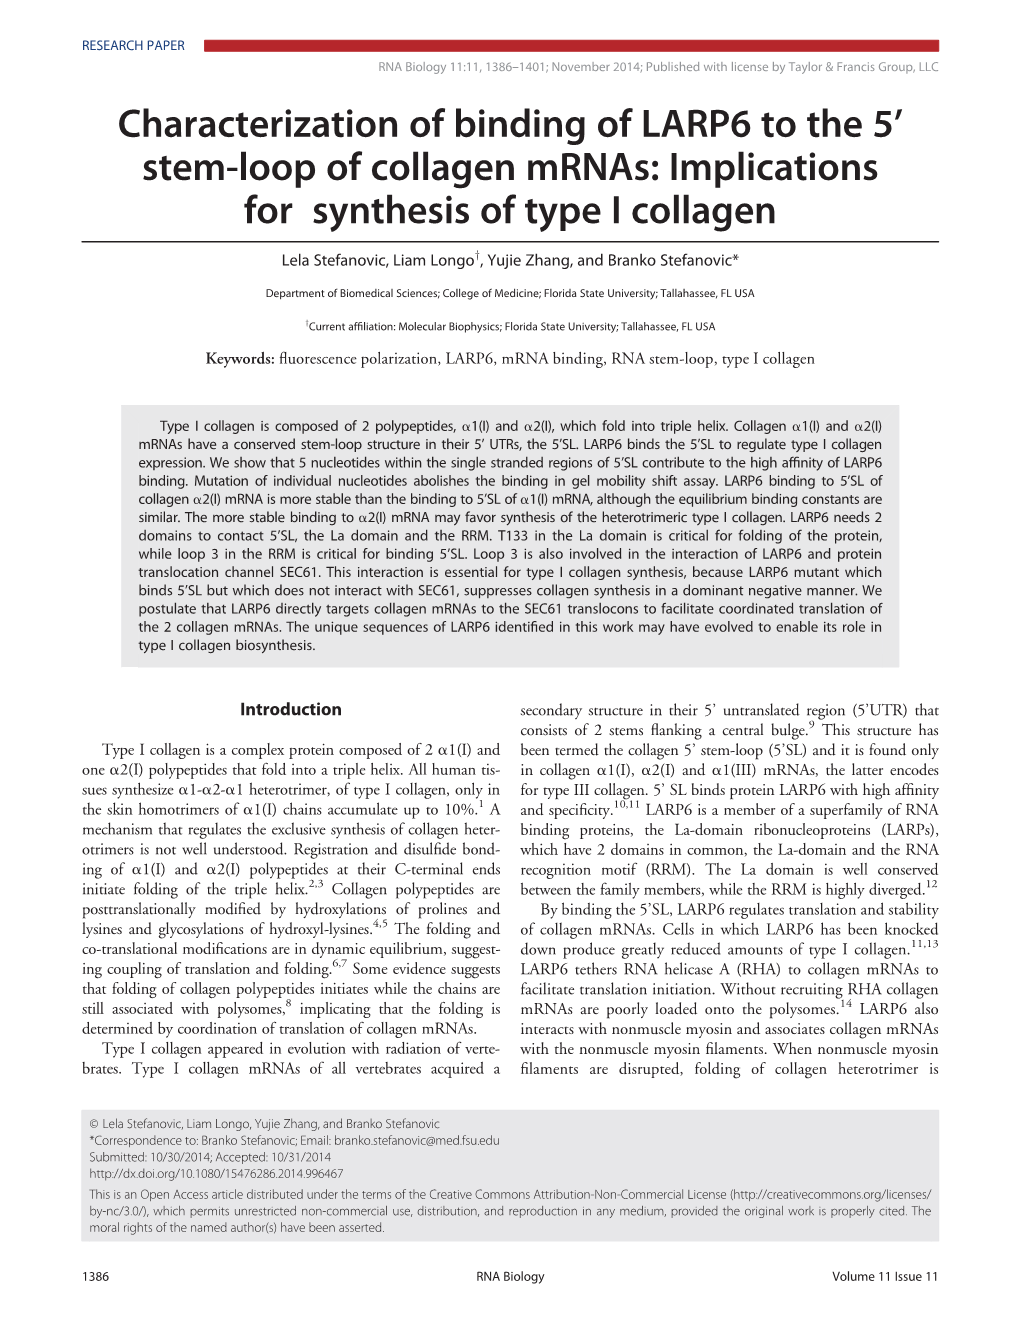 Characterization of Binding of LARP6 to the 5' Stem-Loop of Collagen Mrnas